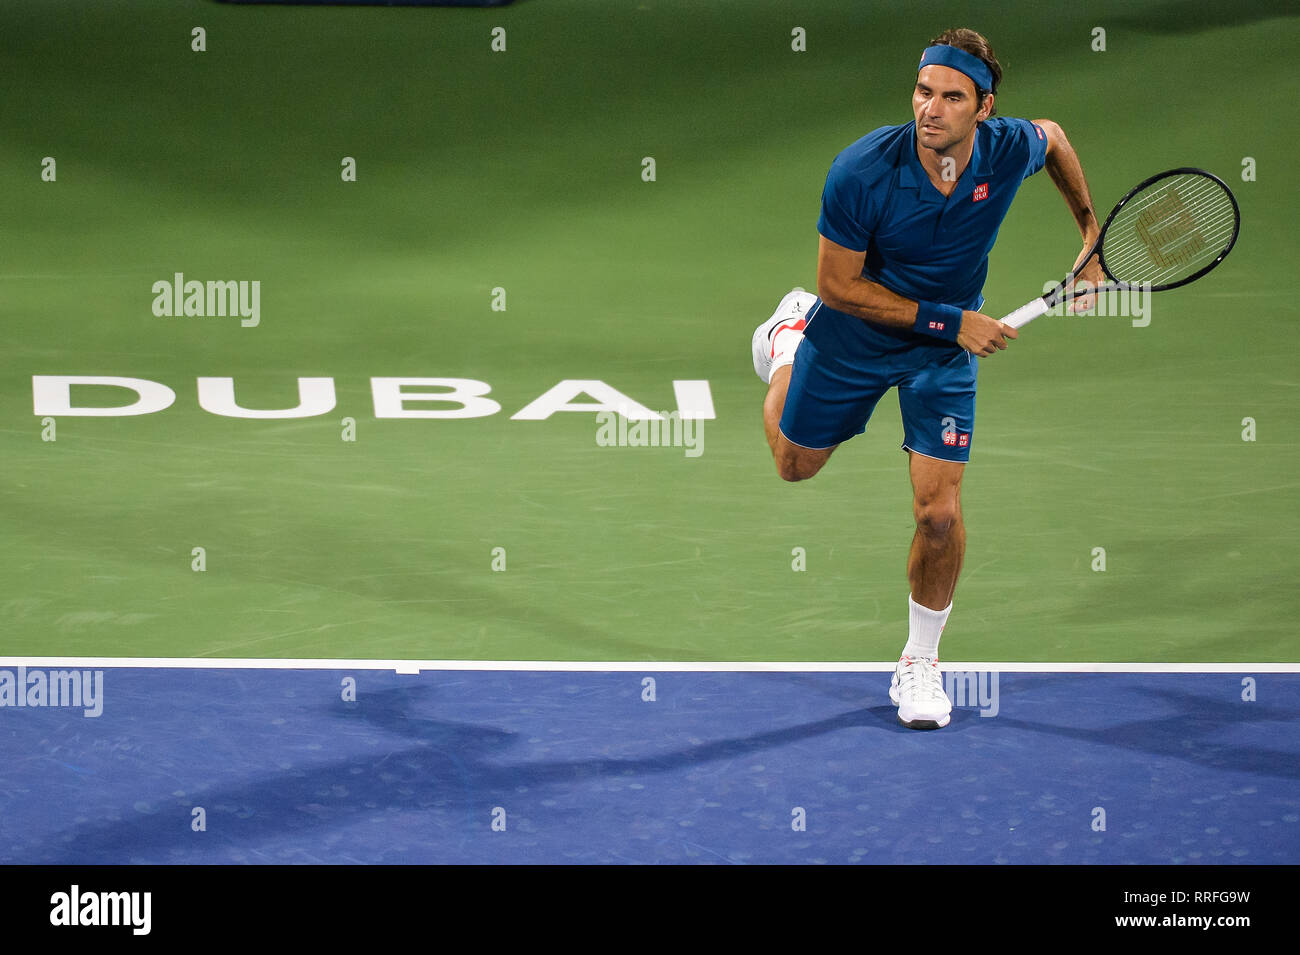 Dubai, UAE. 25th February 2019. Former World no. 1 Roger Federer of  Switzerland on his way to victory against Philipp Kohlschreiber at the 2019  Dubai Duty Free Tennis Championships 2019. A 7